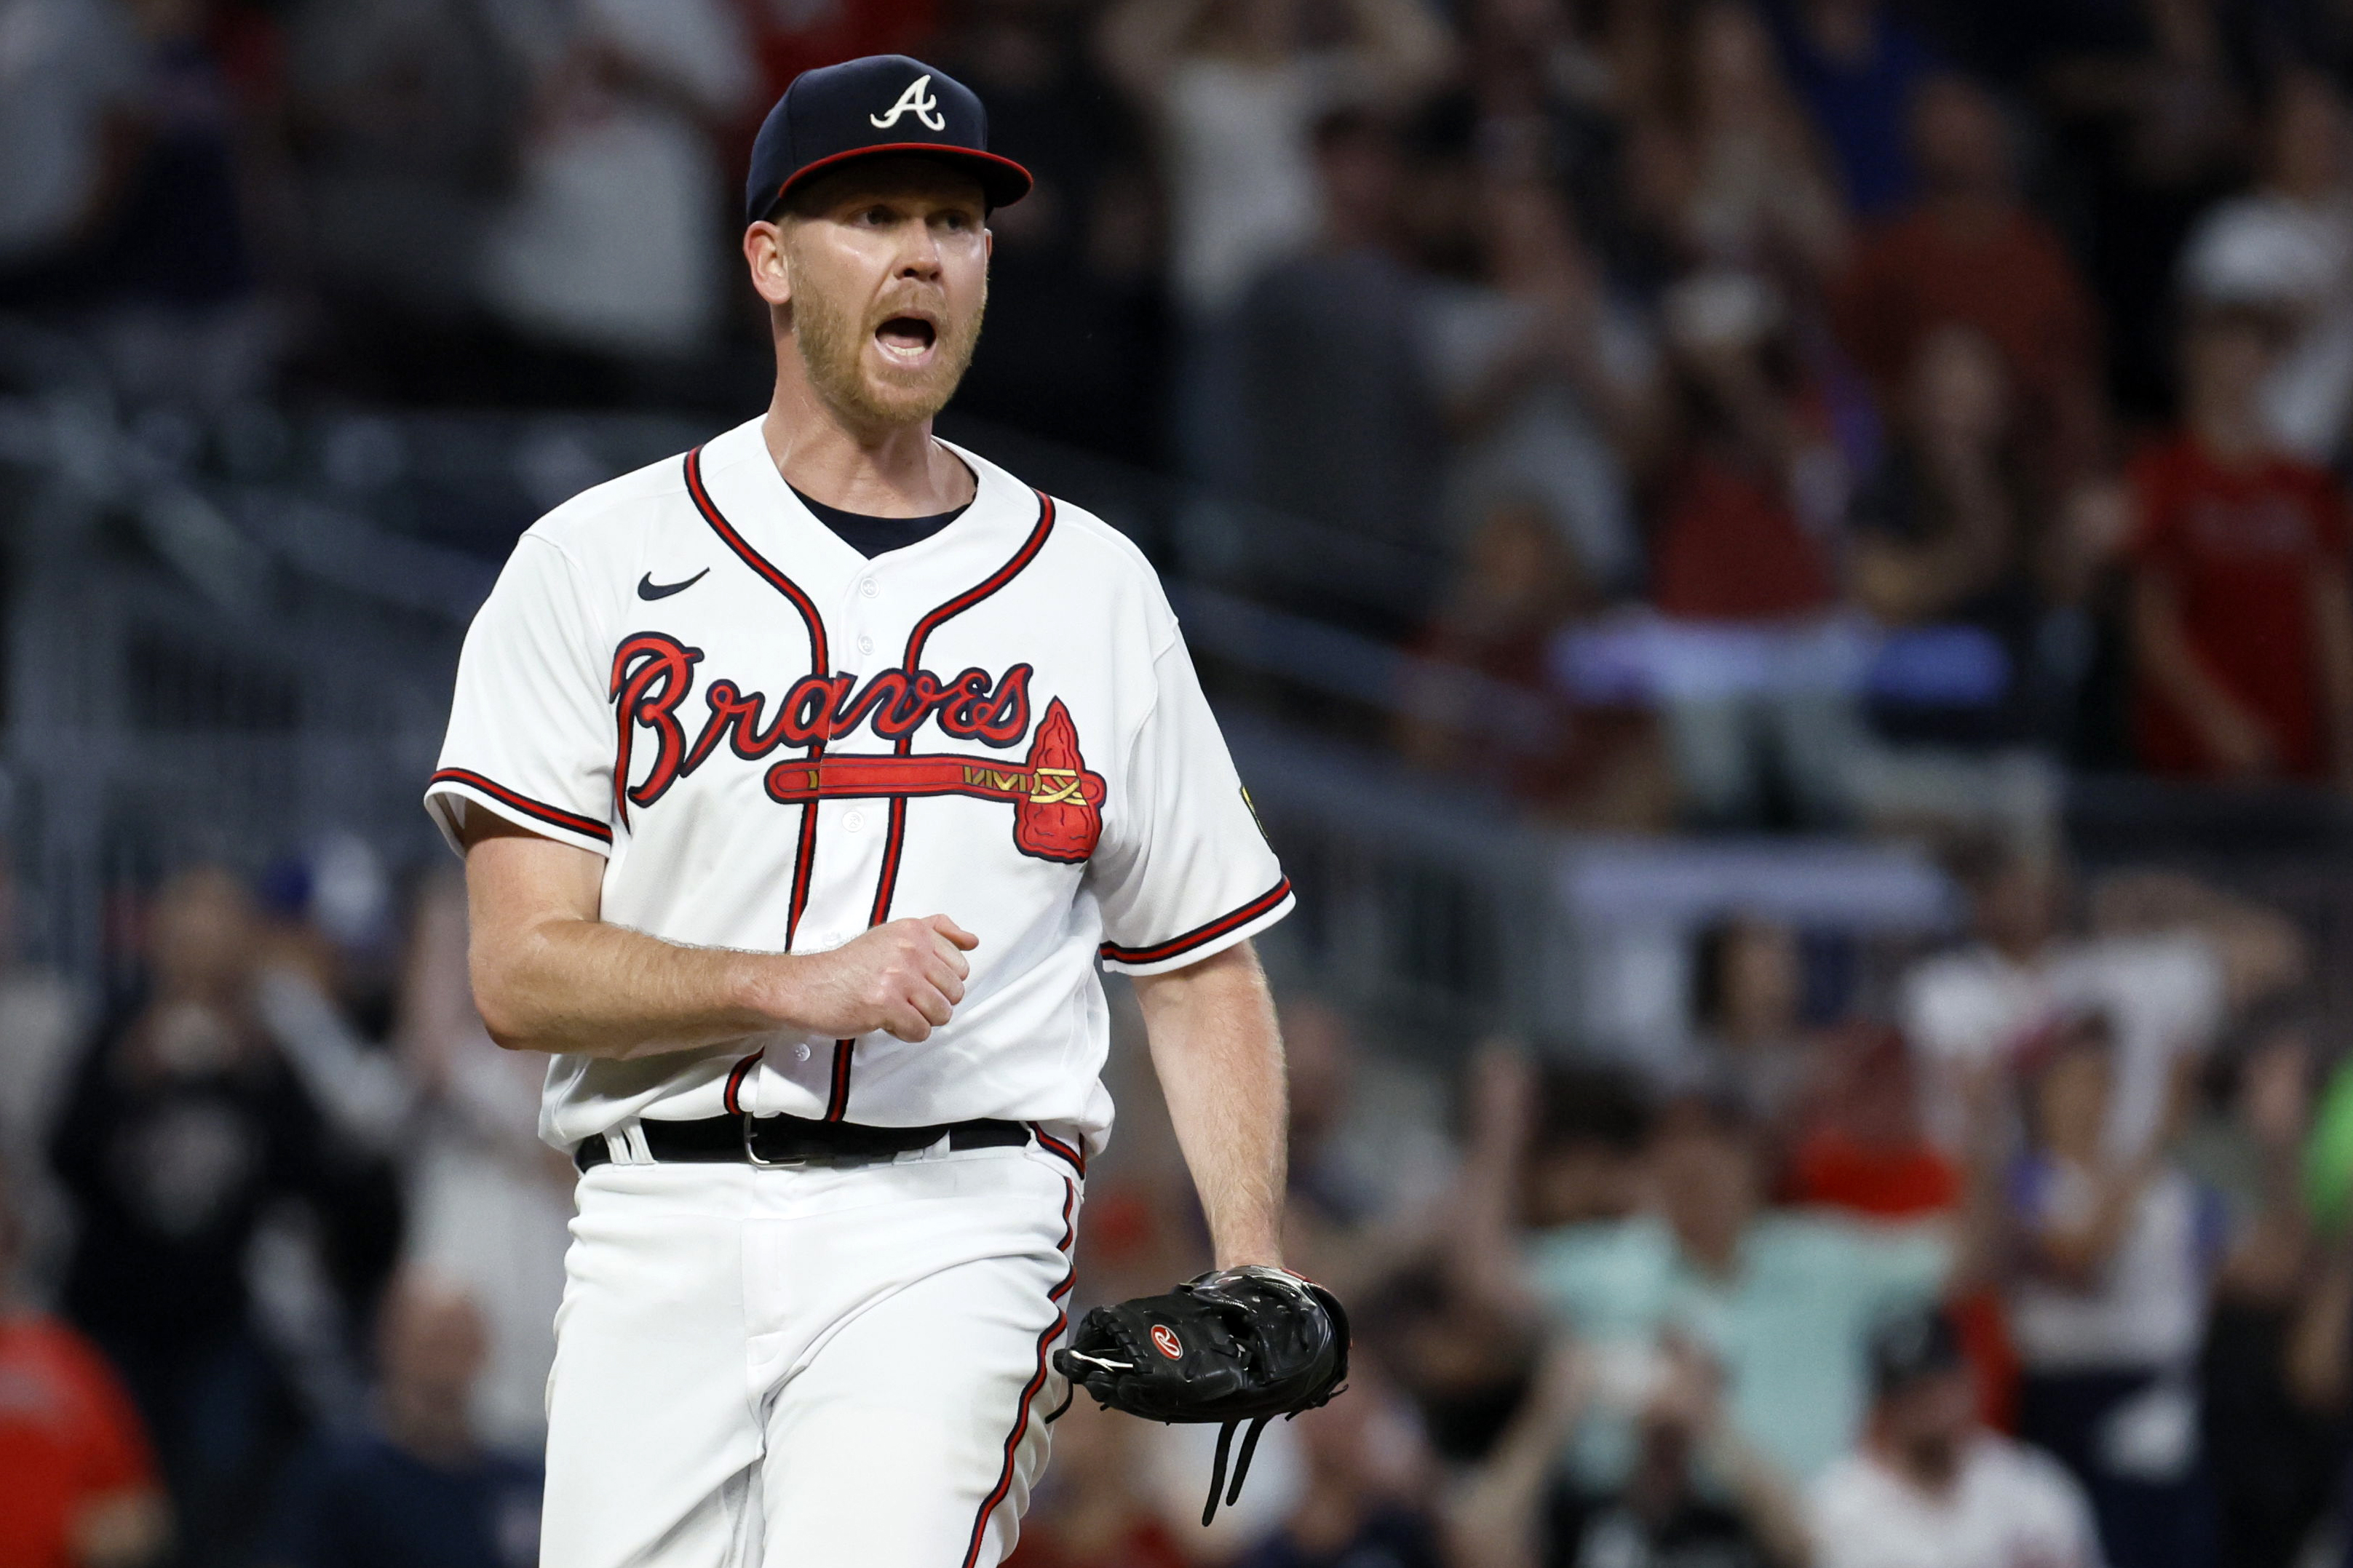 Ozzie Albies, AJ Smith-Shawver lead the Braves to an 8-3 win over the  Rockies